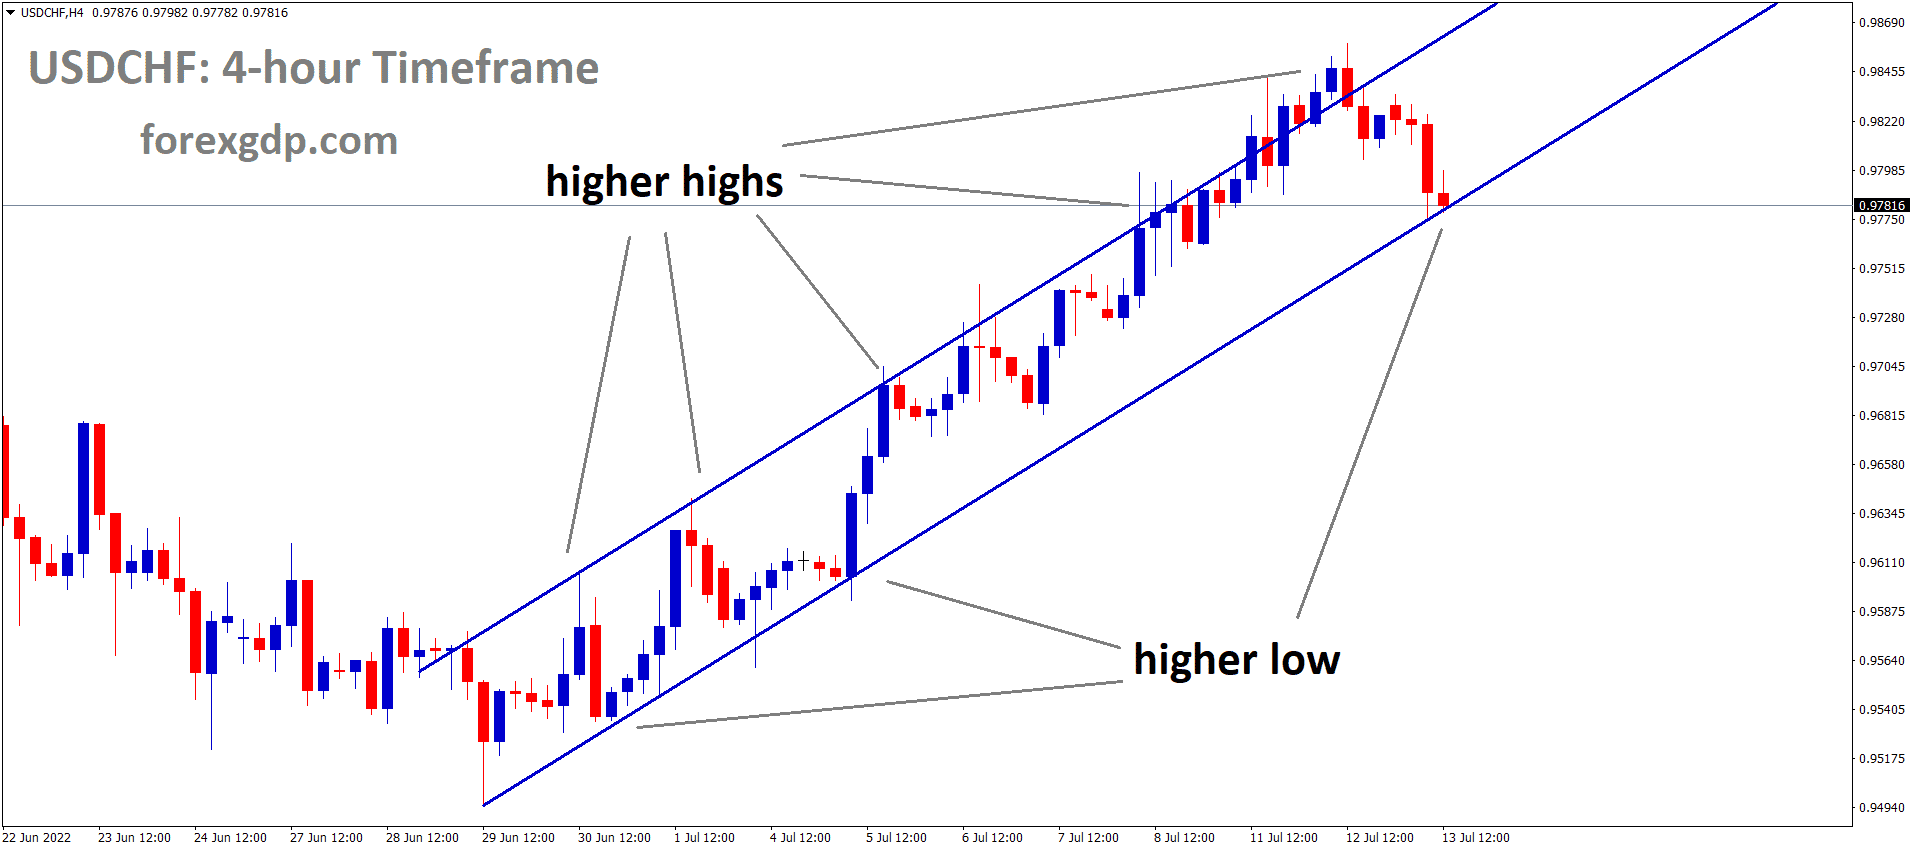 USDCHF is moving in an Ascending channel and the Market has reached the higher low area of the channel 1